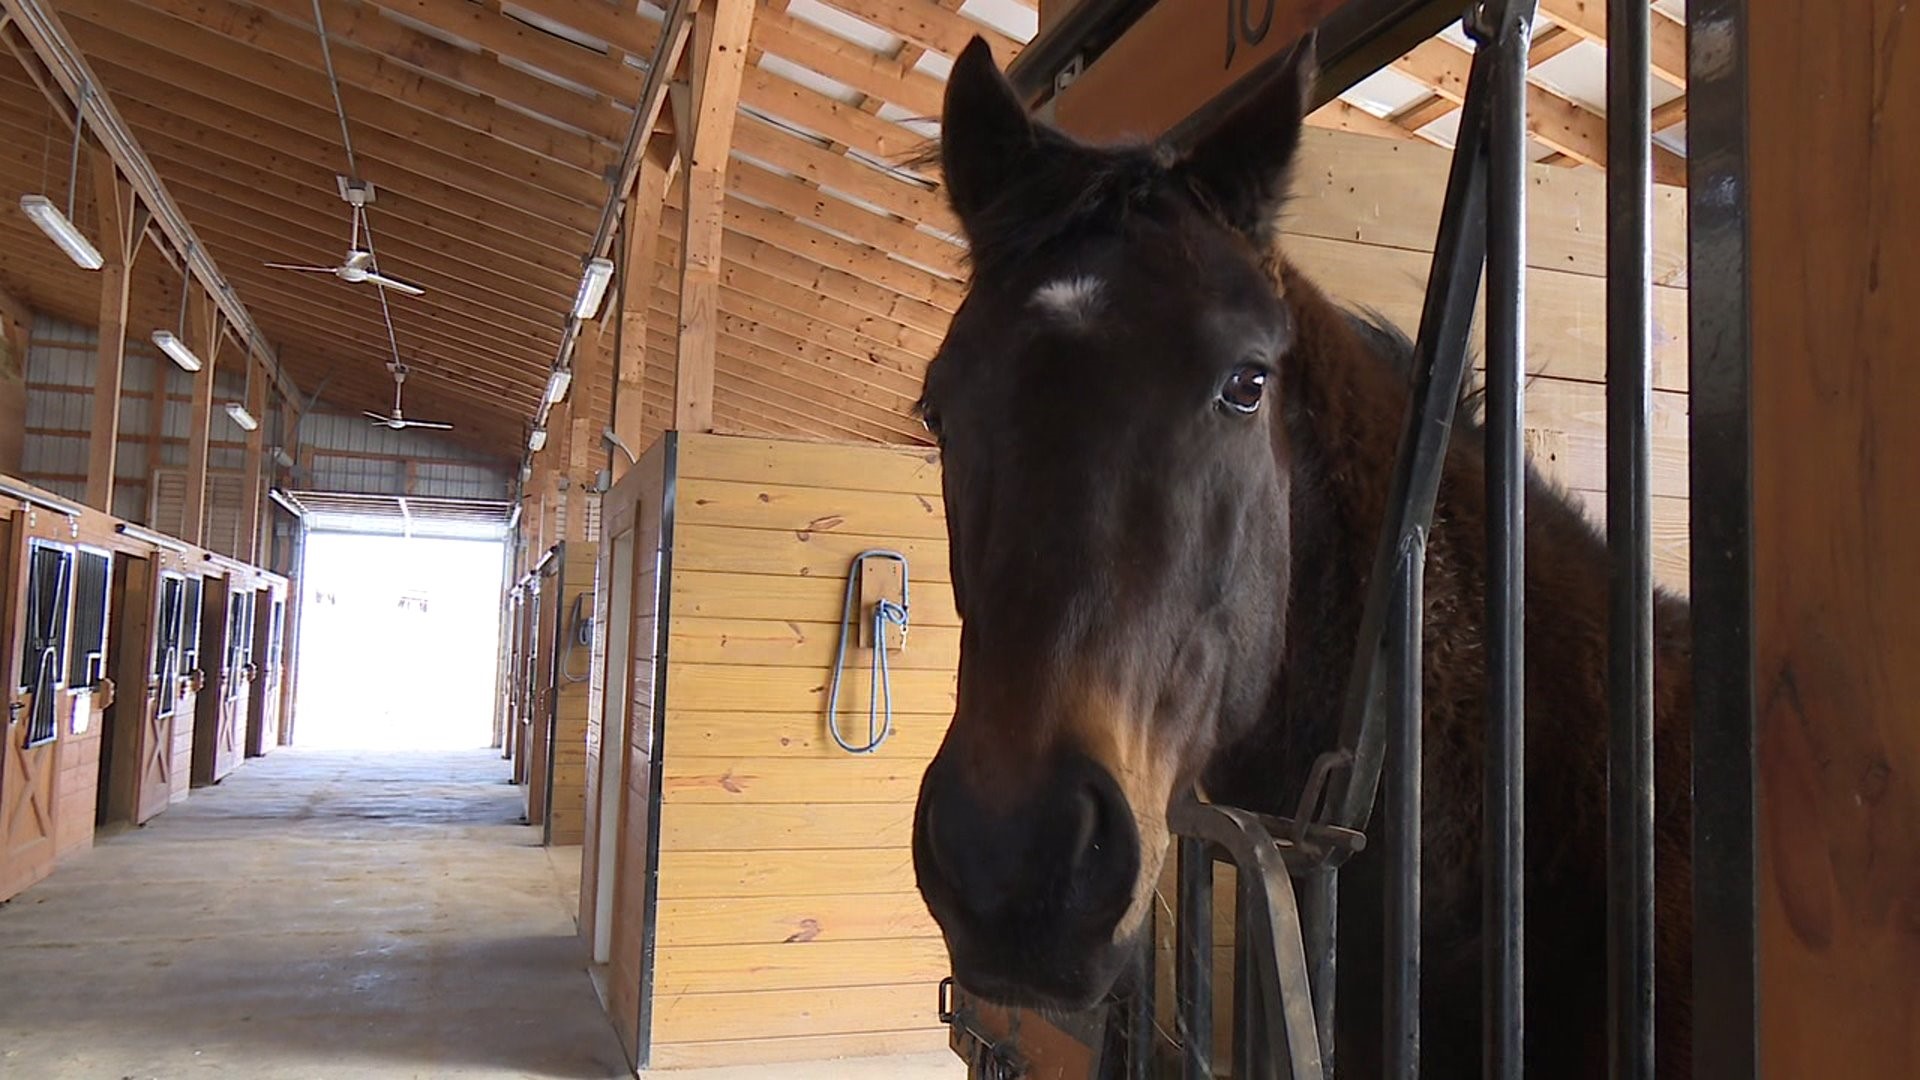 Troopers Seeking Horses to Join Their Ranks